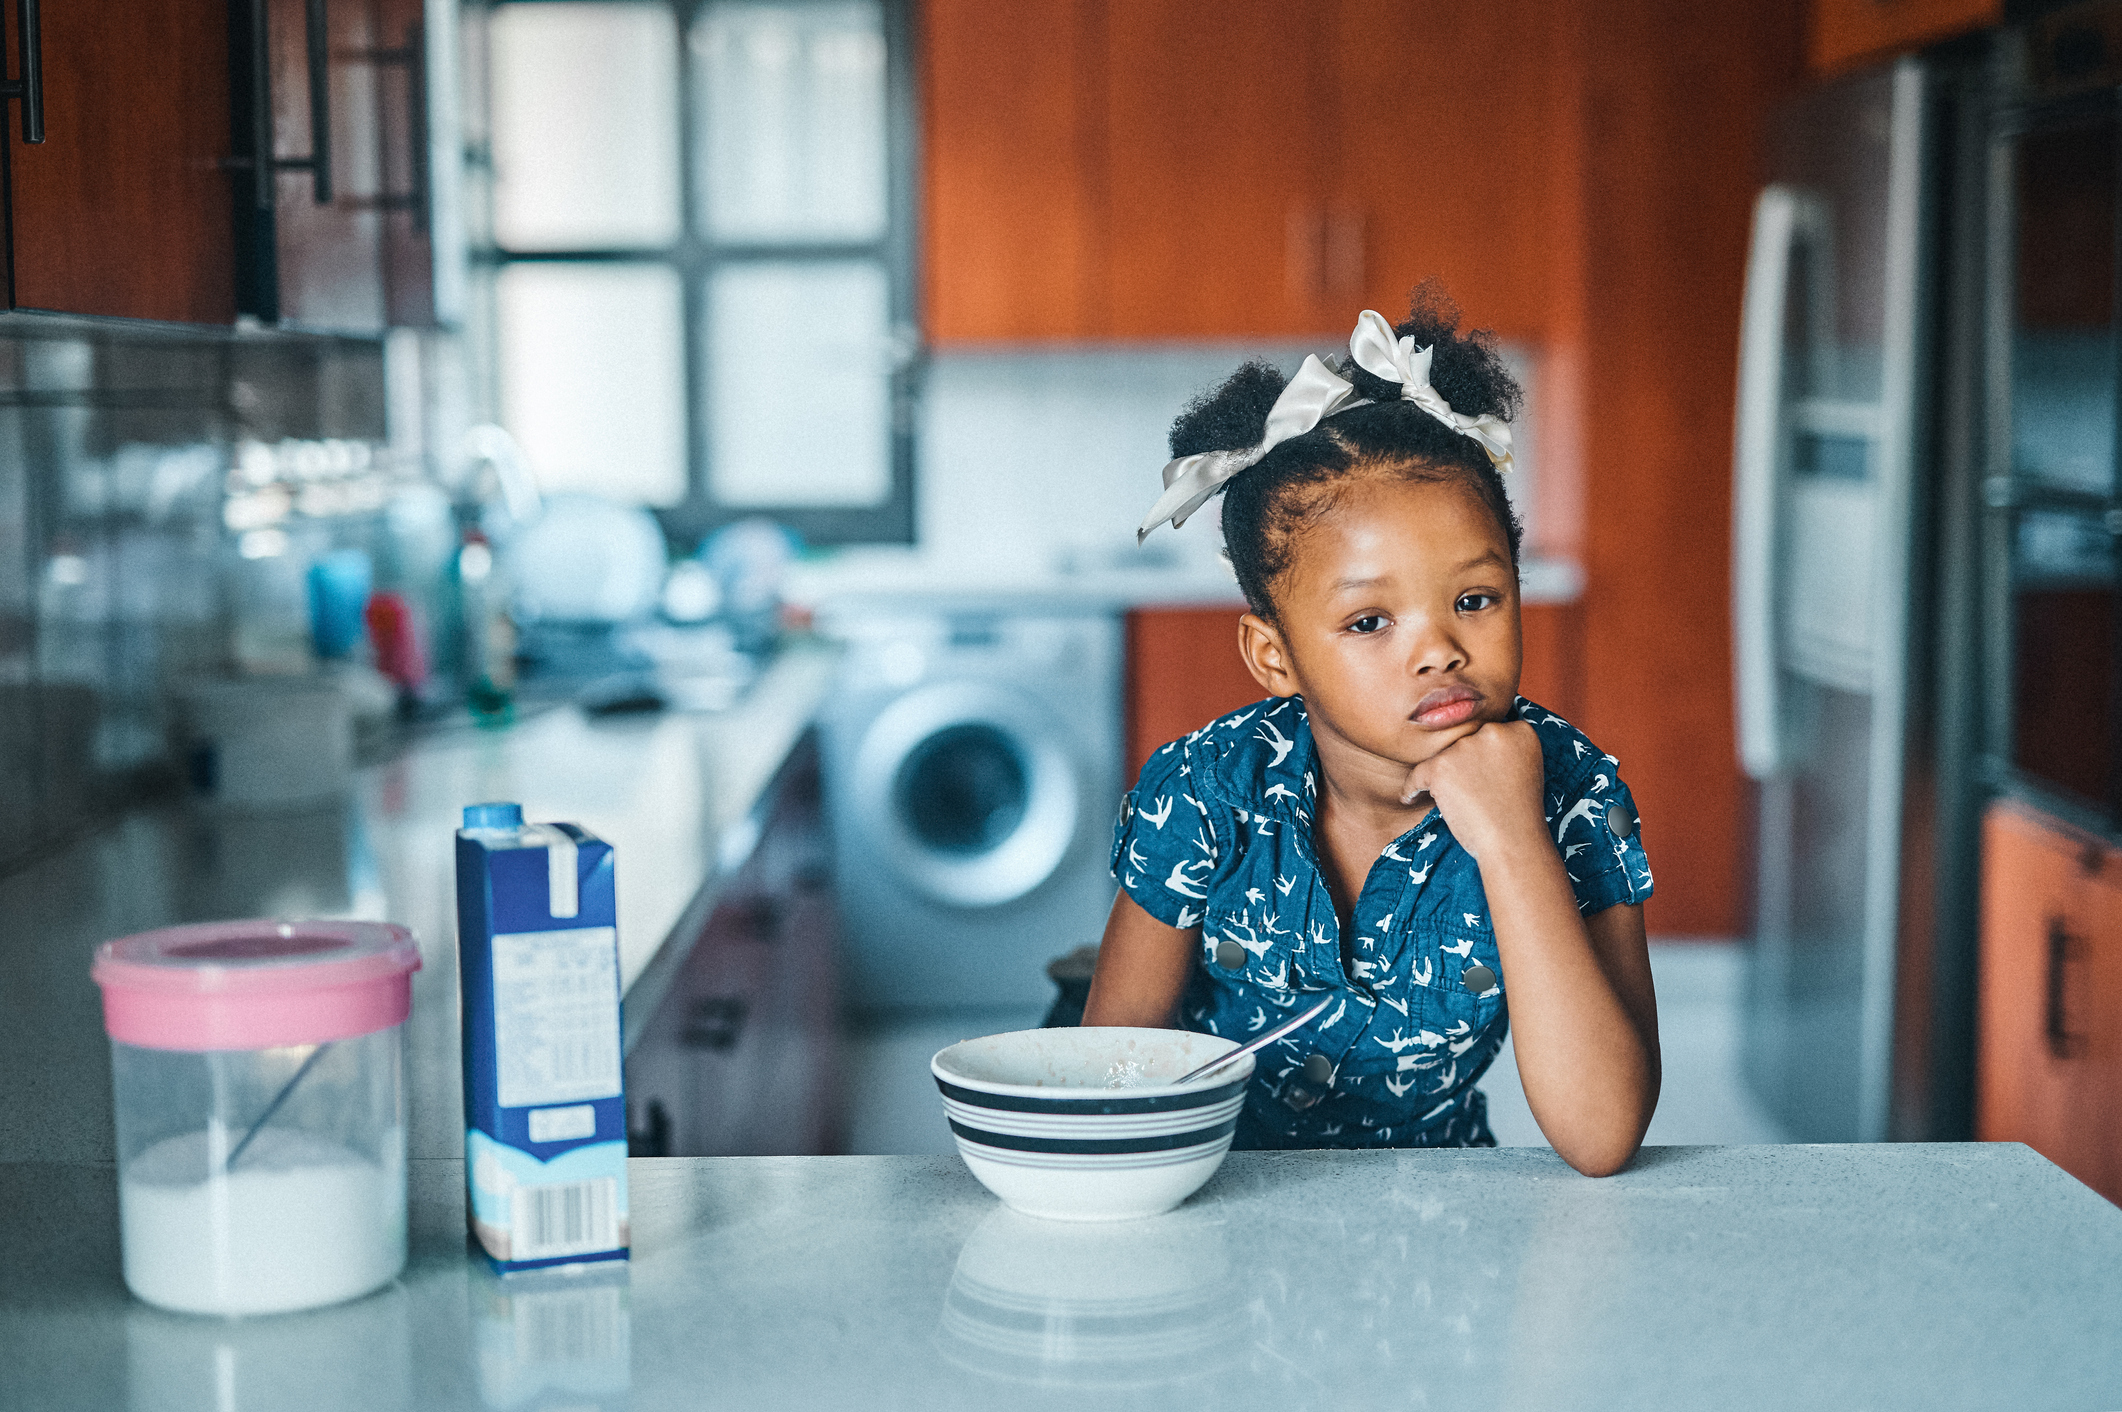 A young girl is sitting at the countertop